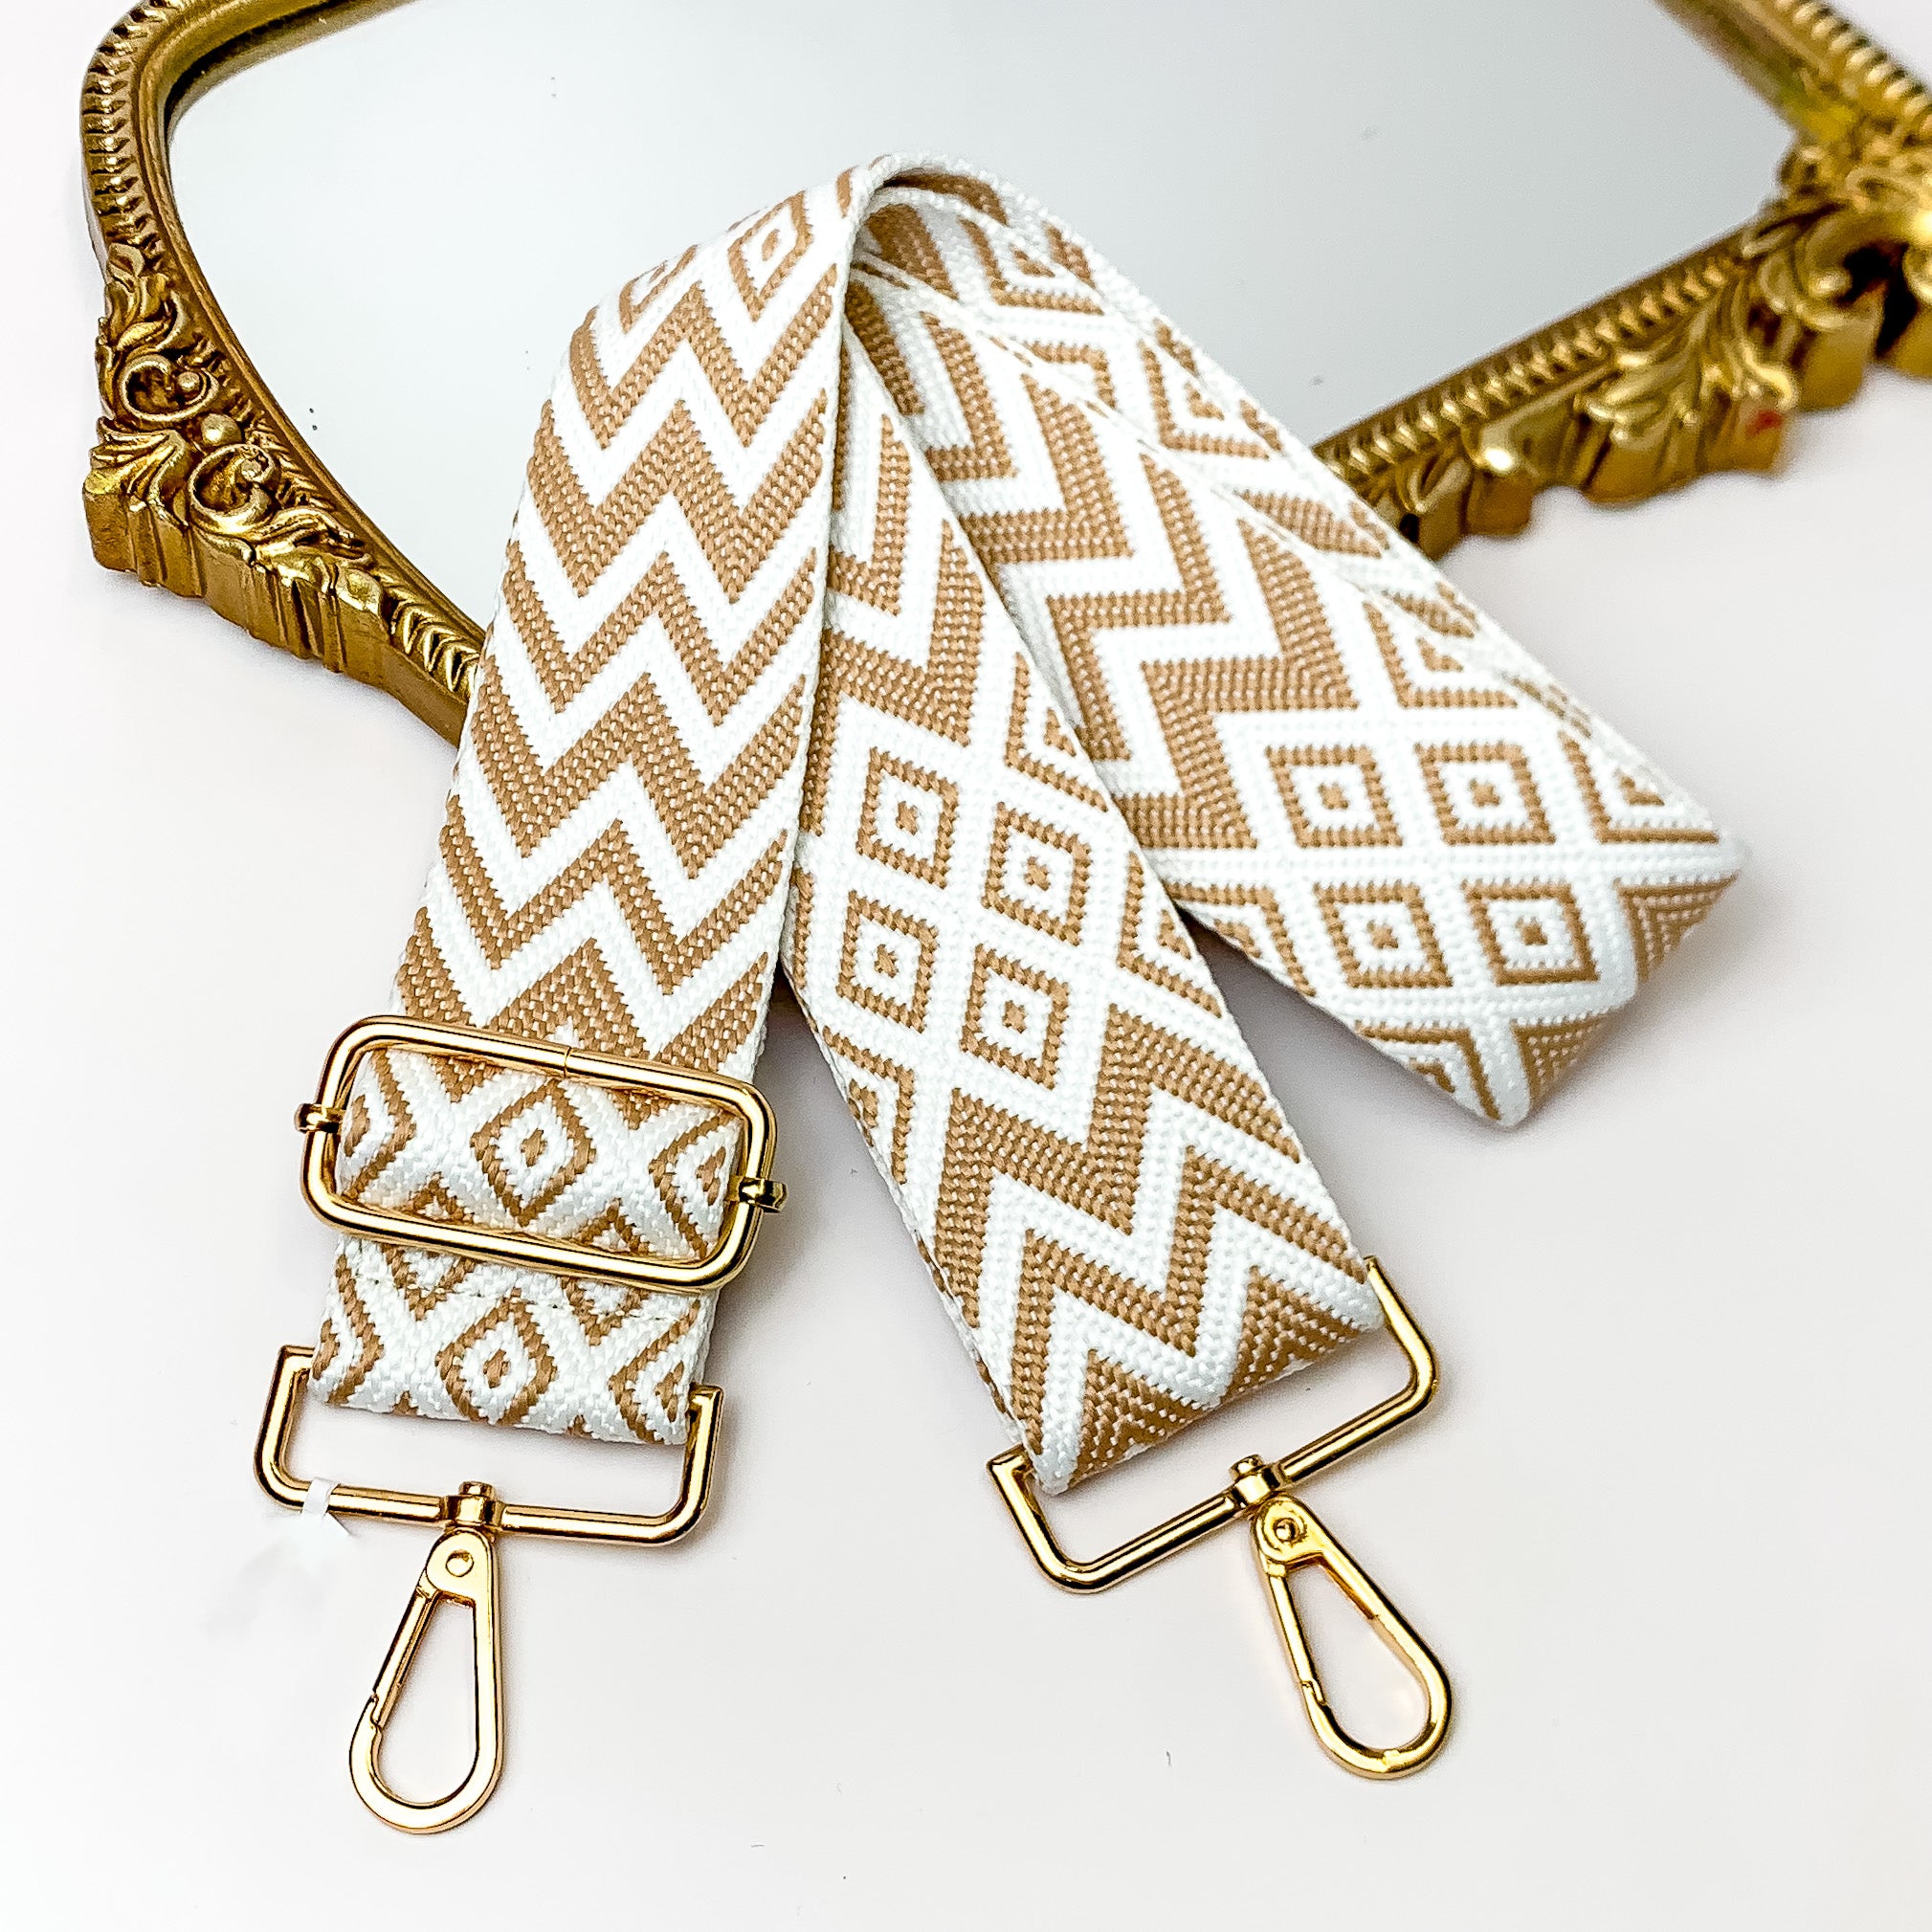 Beaige canvas purse strap with white and beige chevron and diamond design. This purse strap includes gold accents. This purse strap is pictured partially on a gold mirror on a white background.